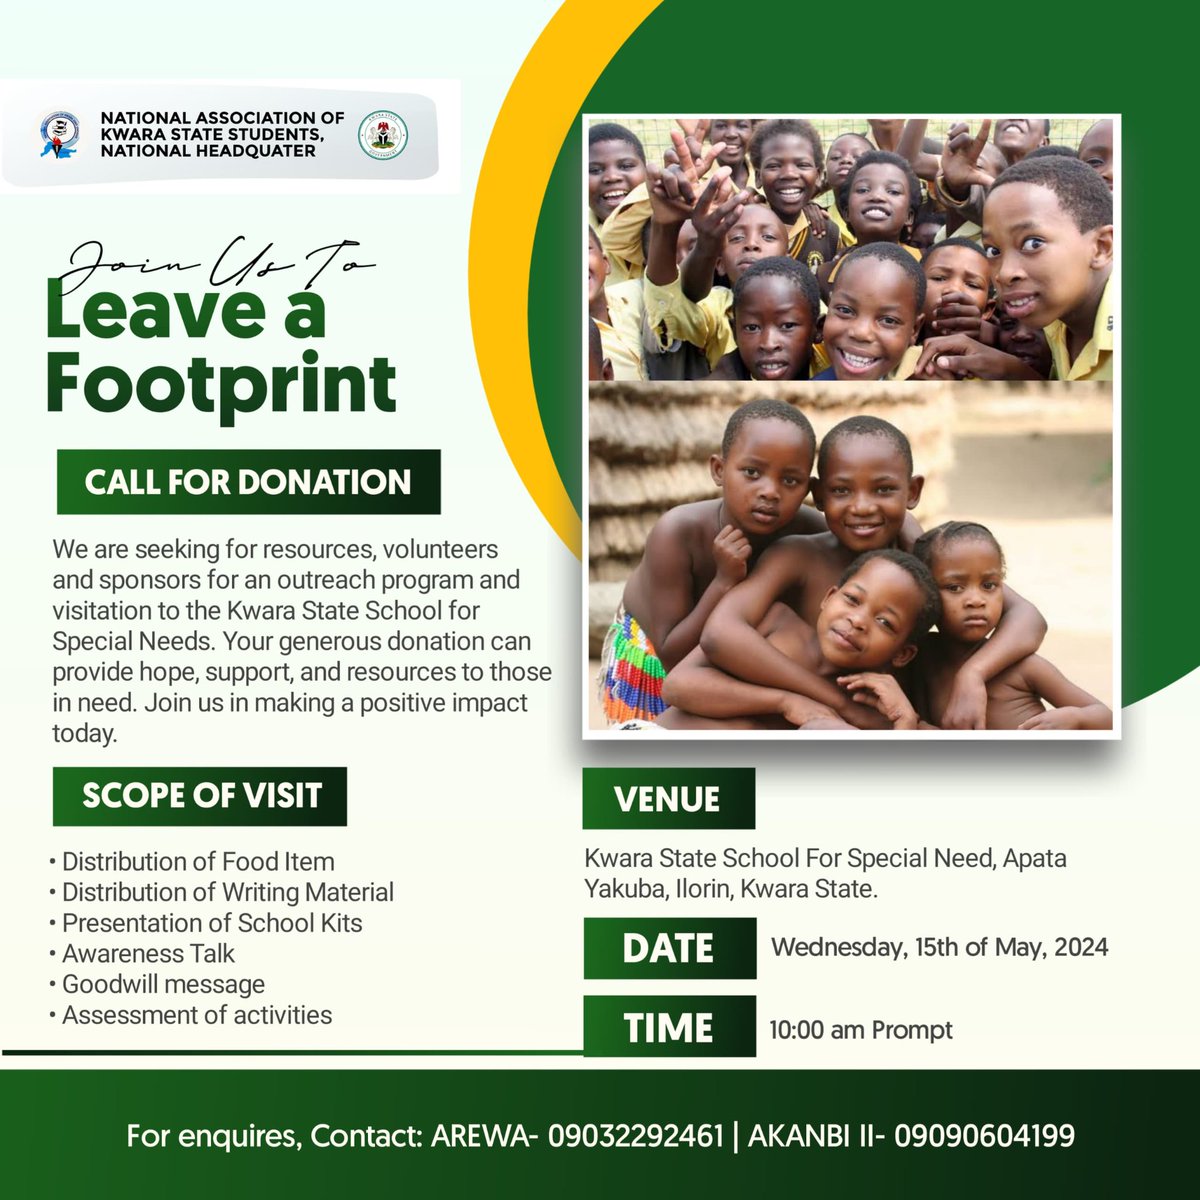 The leadership of the National Association of Kwara State Students (NAKSS) set to pay the Kwara State School of Special Needs, Ilorin an outreach visit tomorrow Wednesday 15th of May, 2024. Time: 10:00 am 1/